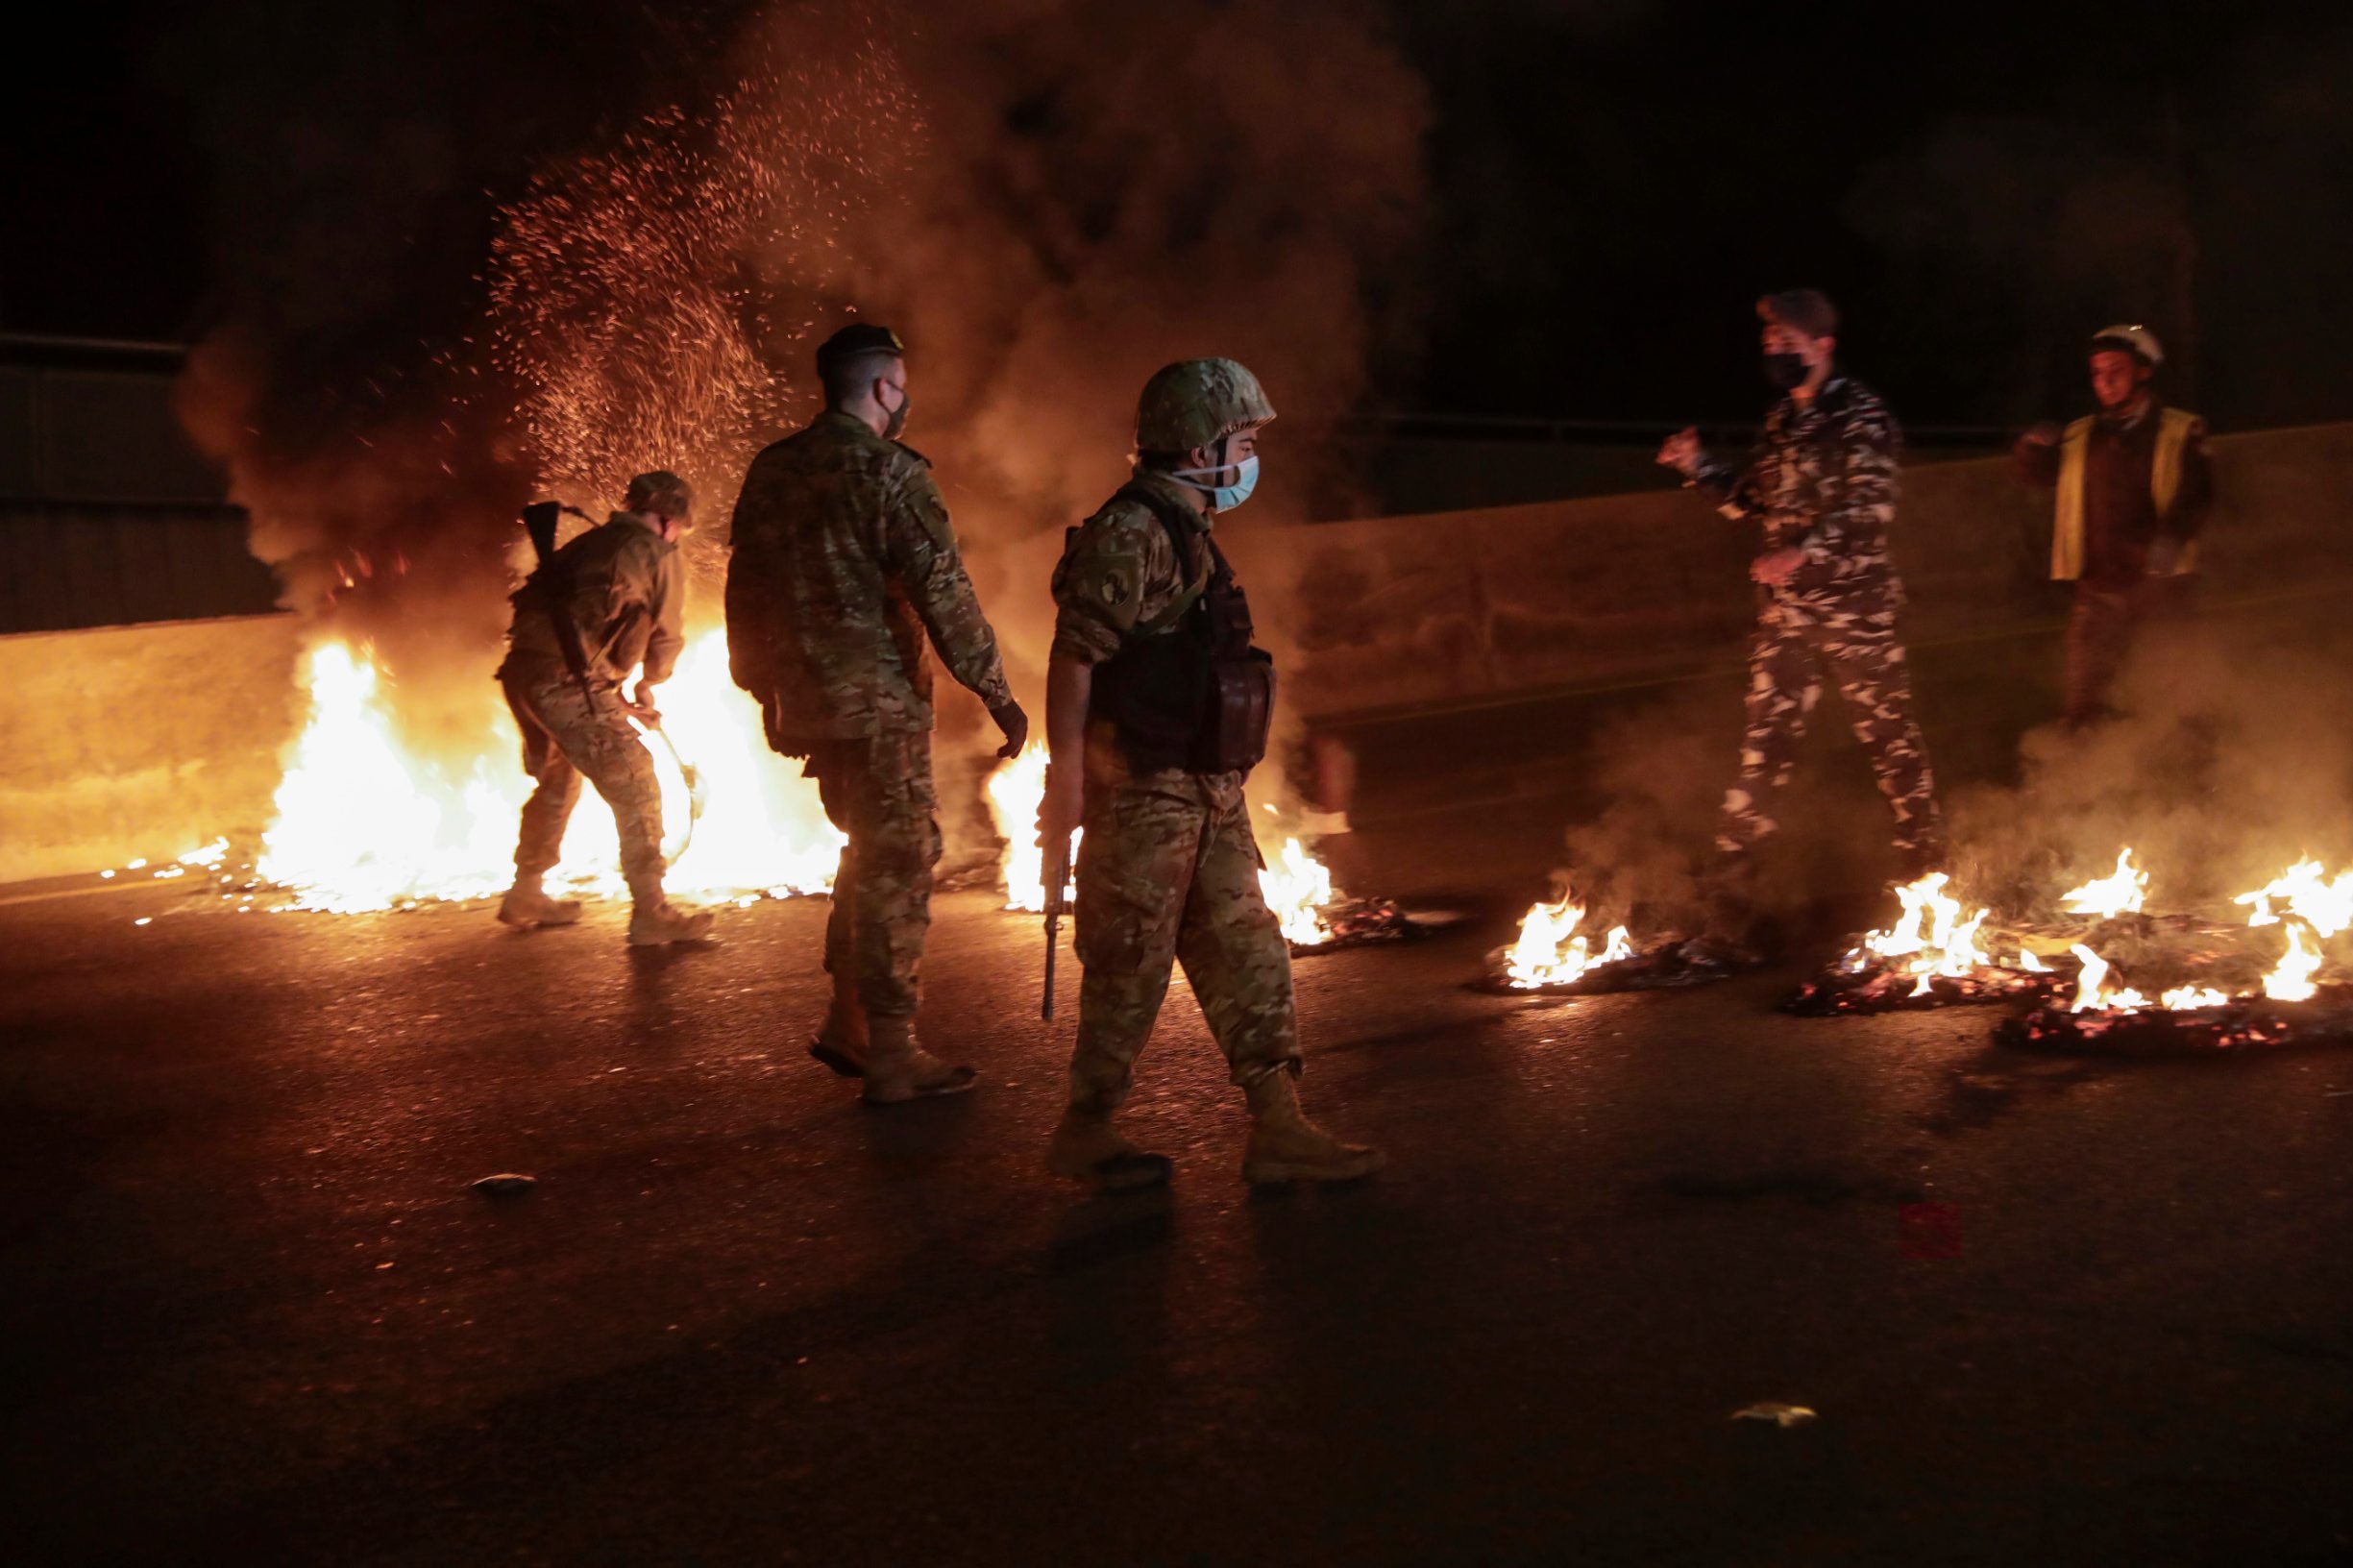 Members of the Lebanese army and security quell burning tyres which anti-government protesters have set aflame, blocking the coastal highway north in the Dbayeh area, north of the capital Beirut, early on April 27, 2020, in protest of the deteriorating economic situation. - Lebanon's worst economic crisis since the 1975-1990 civil war is now compounded by the coronavirus lockdown and nighttime curfew. Still, protesters have staged several daytime demonstrations recently, in continuation of a nationwide protest which erupted in October last year. (Photo by ANWAR AMRO / AFP)